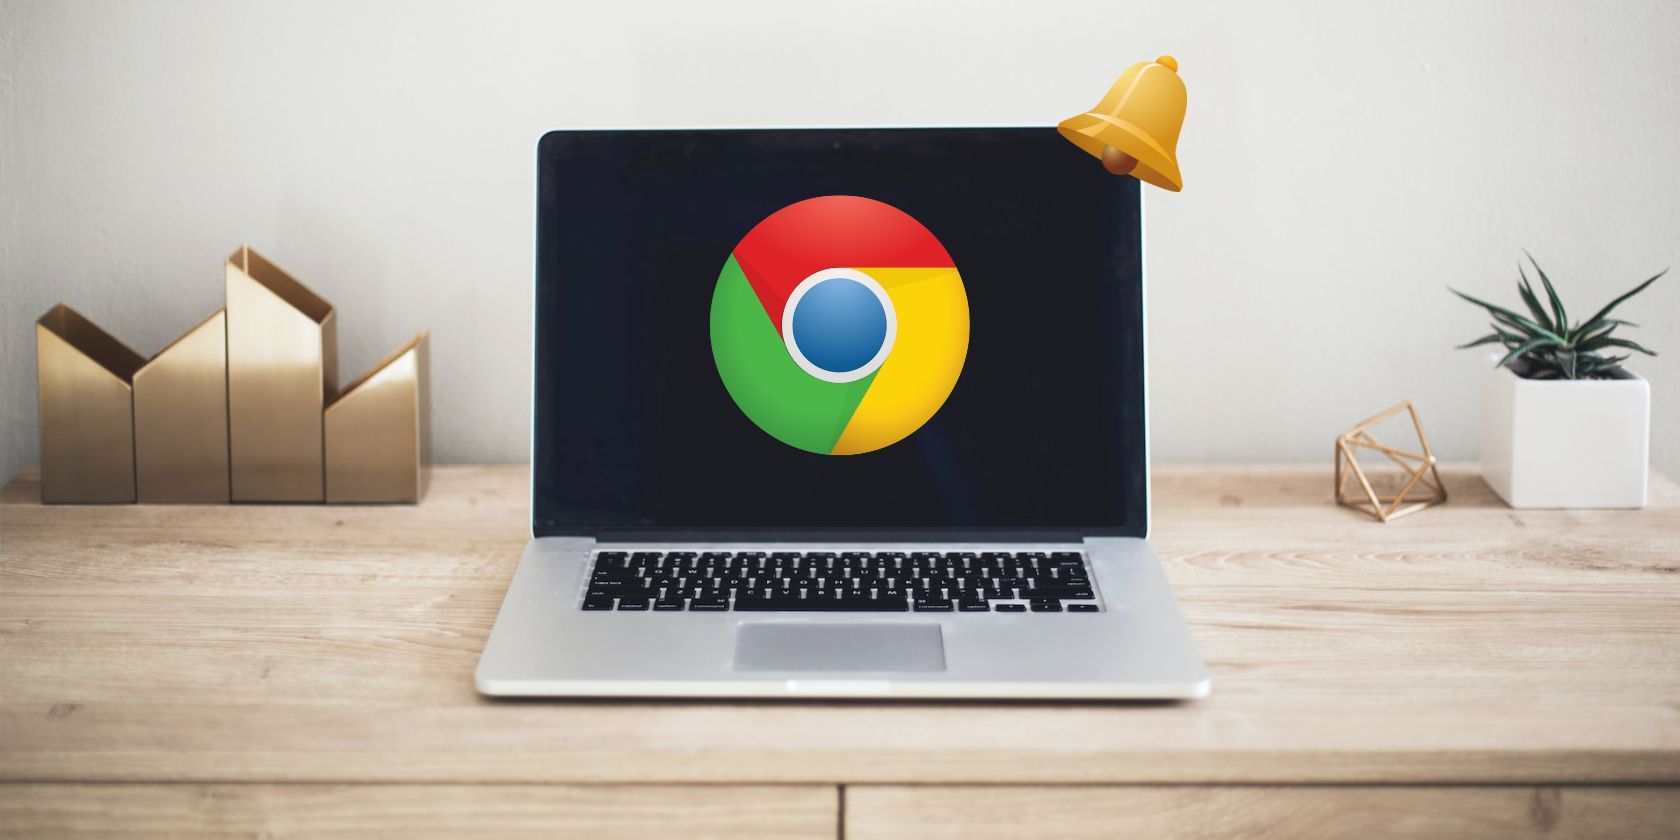 How to Turn Off Google Chrome Notifications on Windows